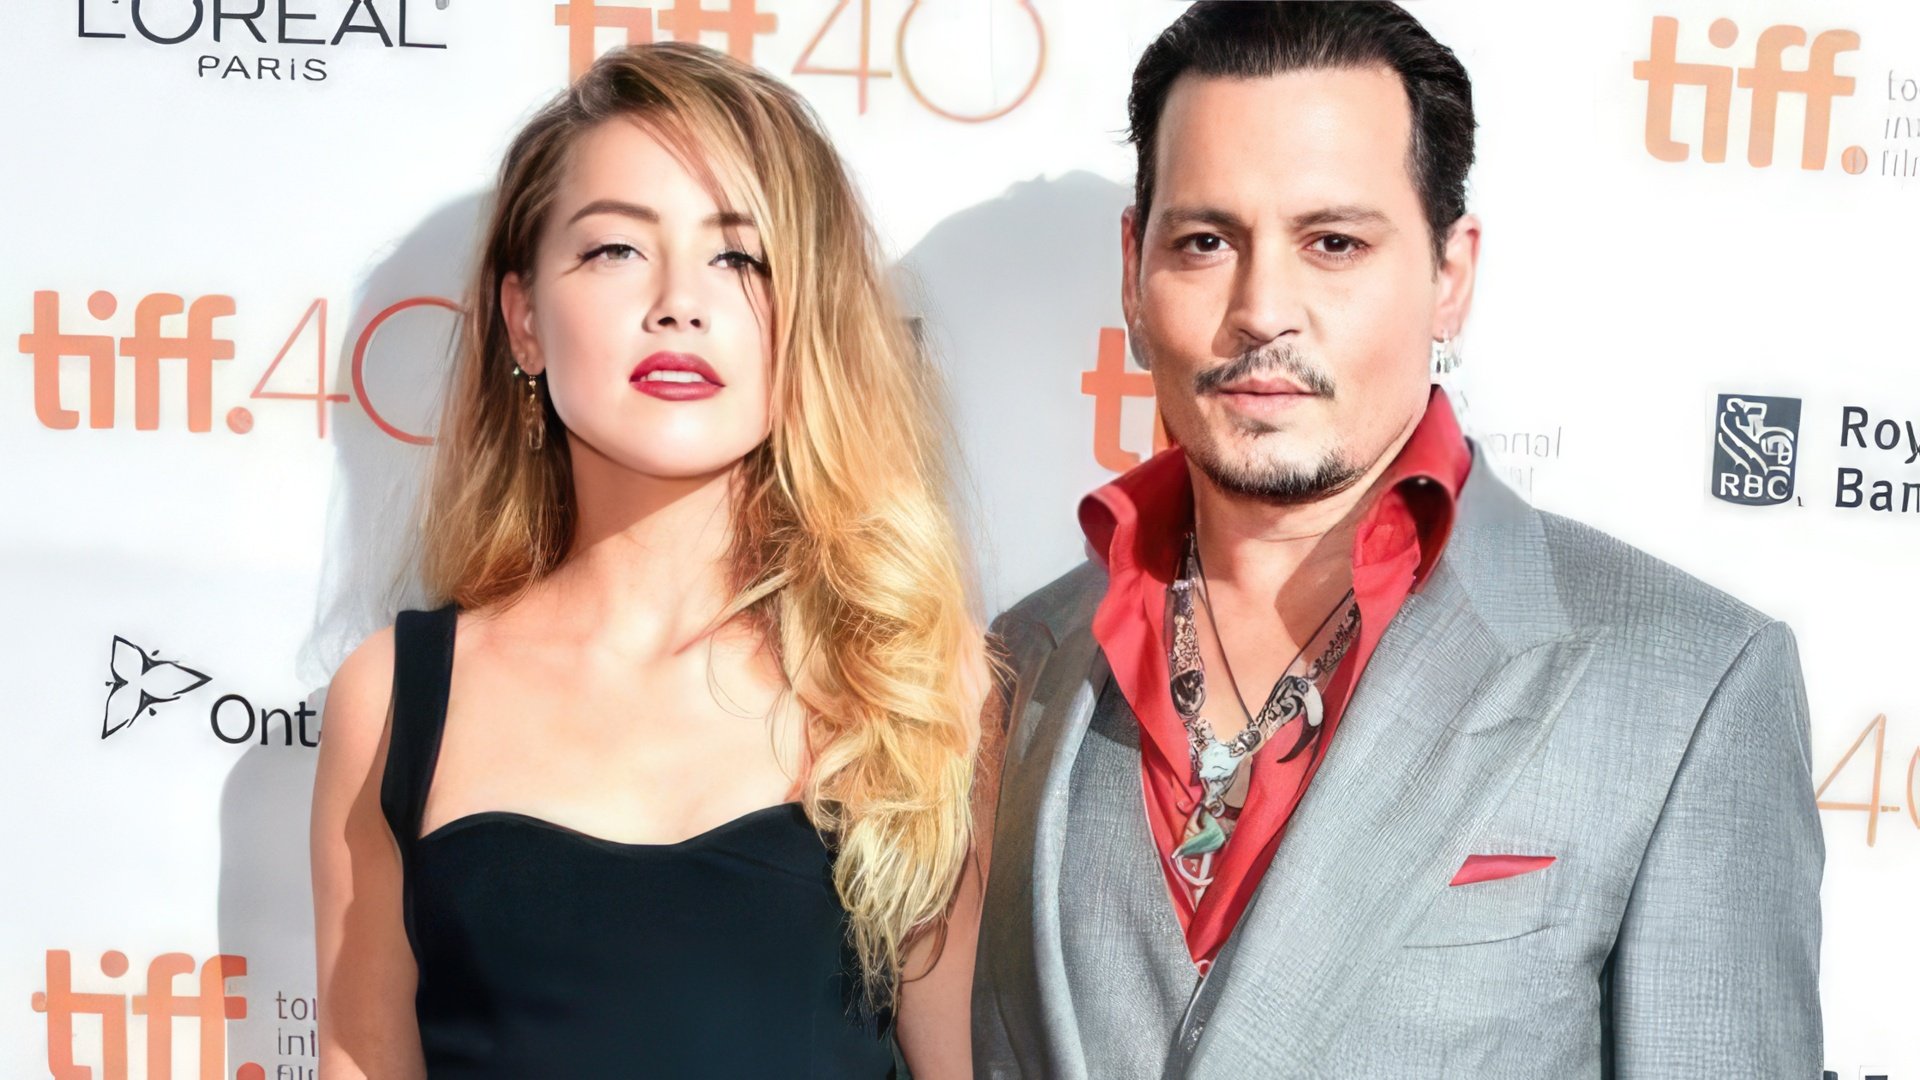 Johnny Depp and Amber Heard broke up in May, 2016